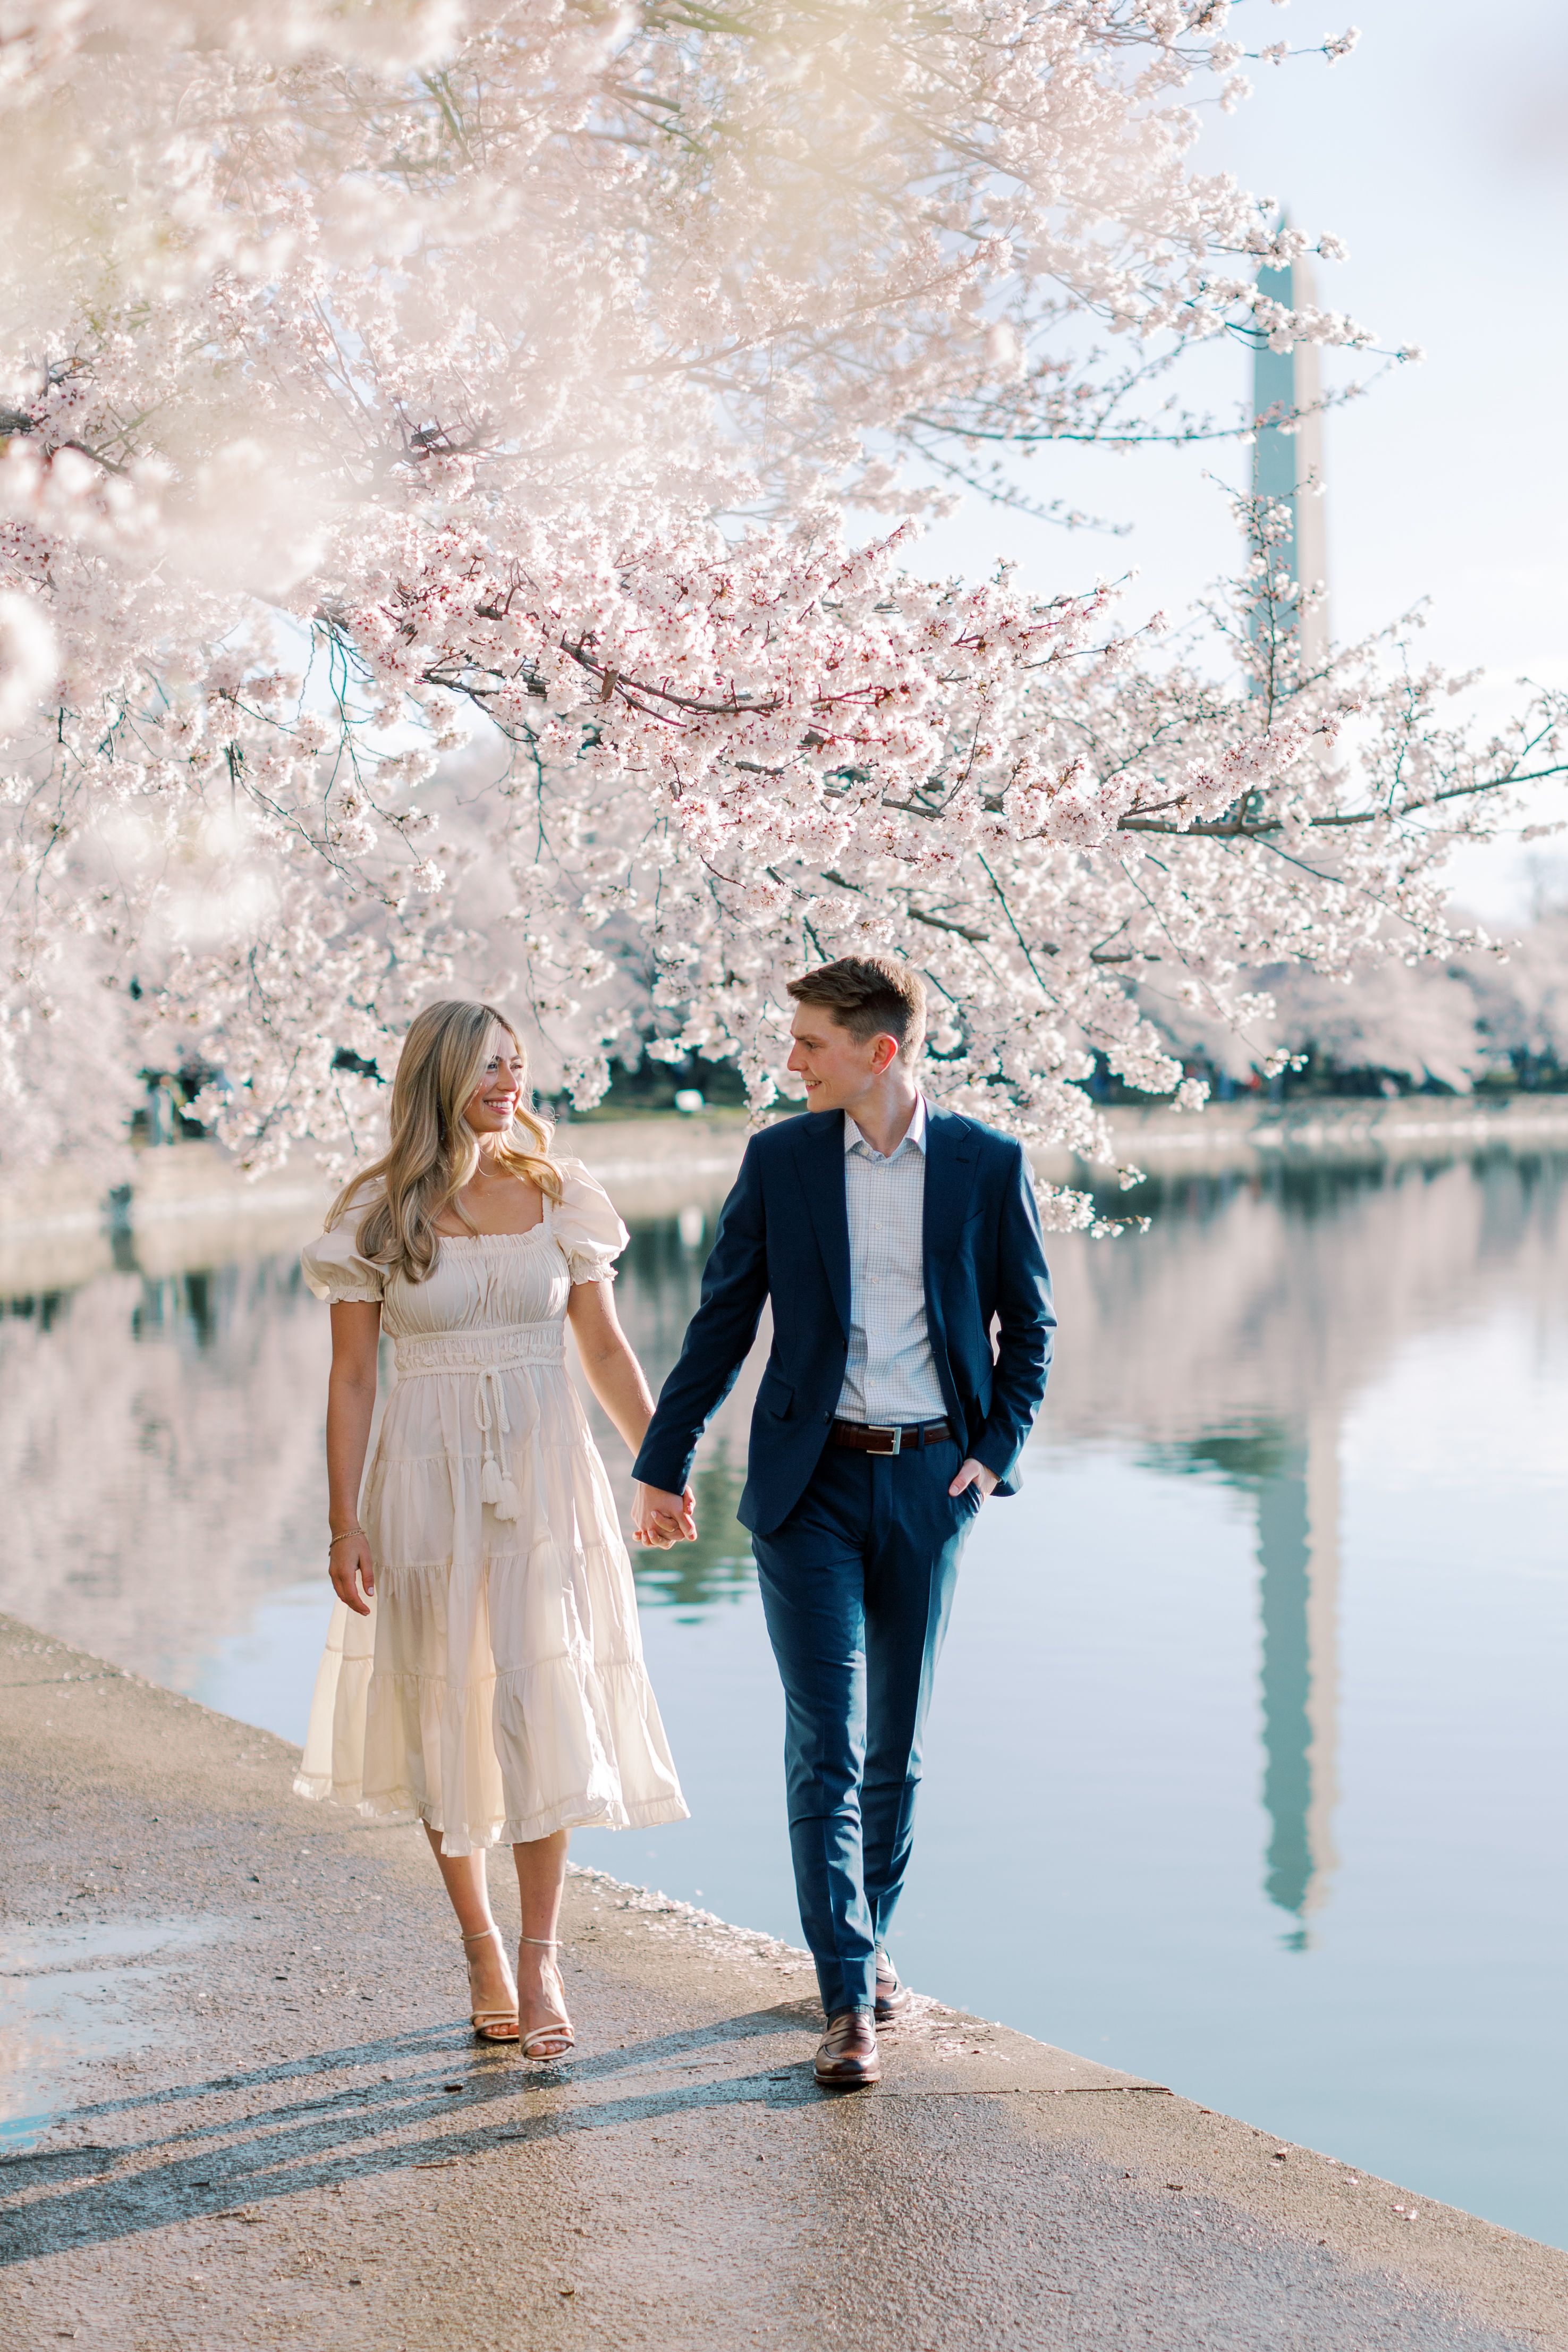 A couple poses in front of cherry blossoms with the monument in the background.